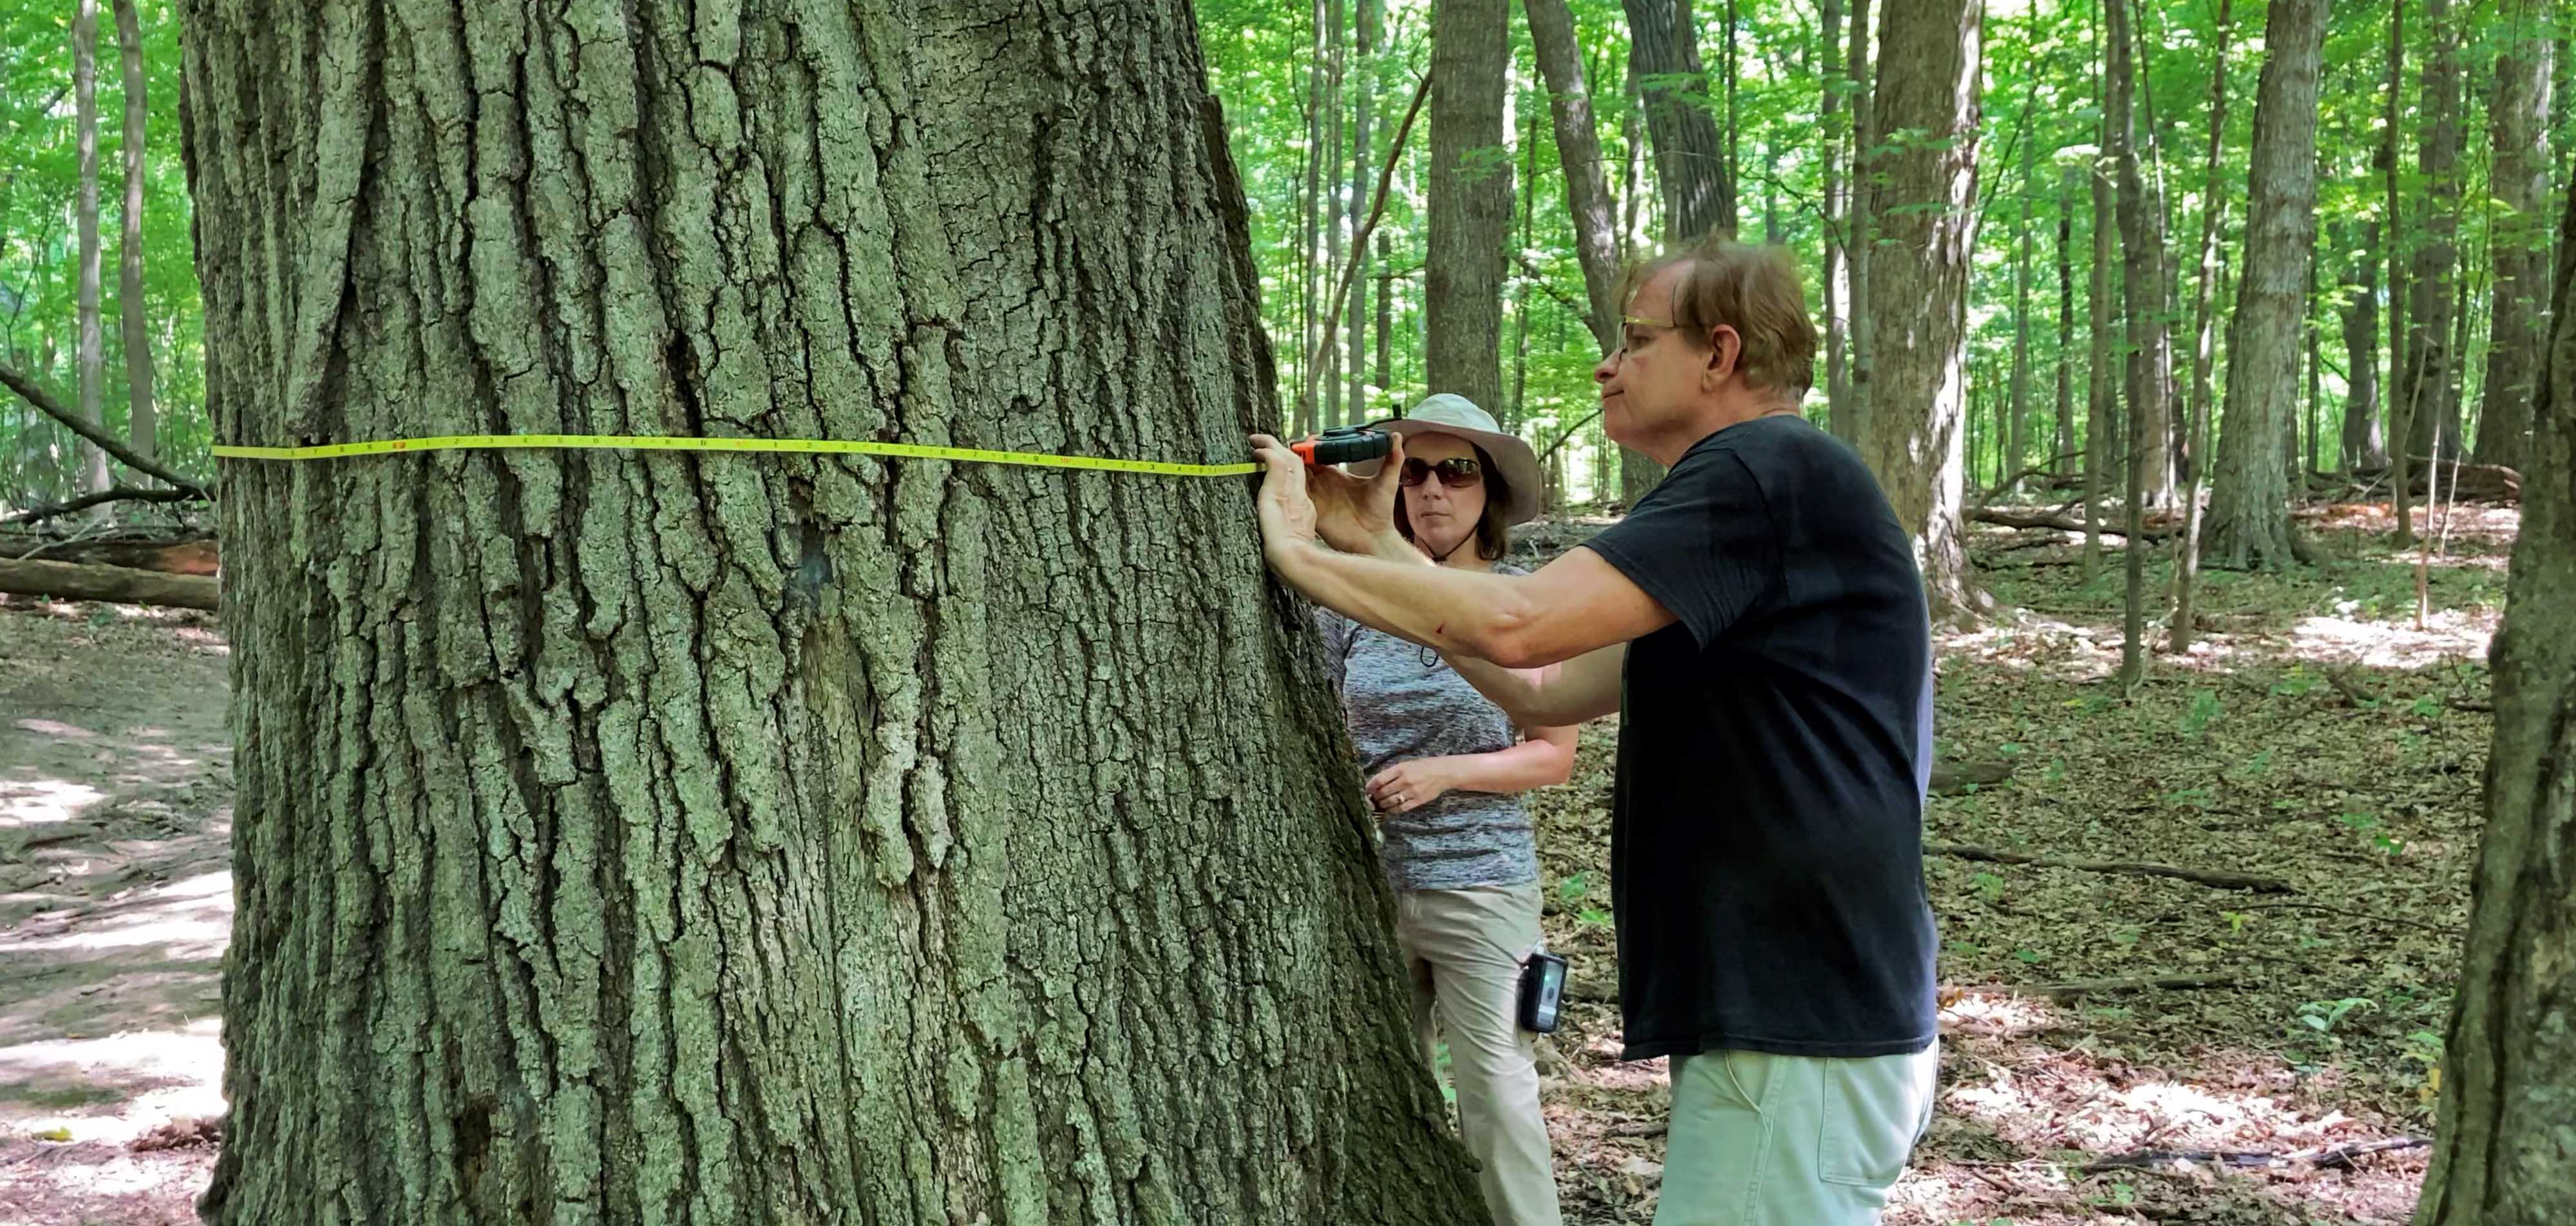 A man and woman measure a large tree in a forest.